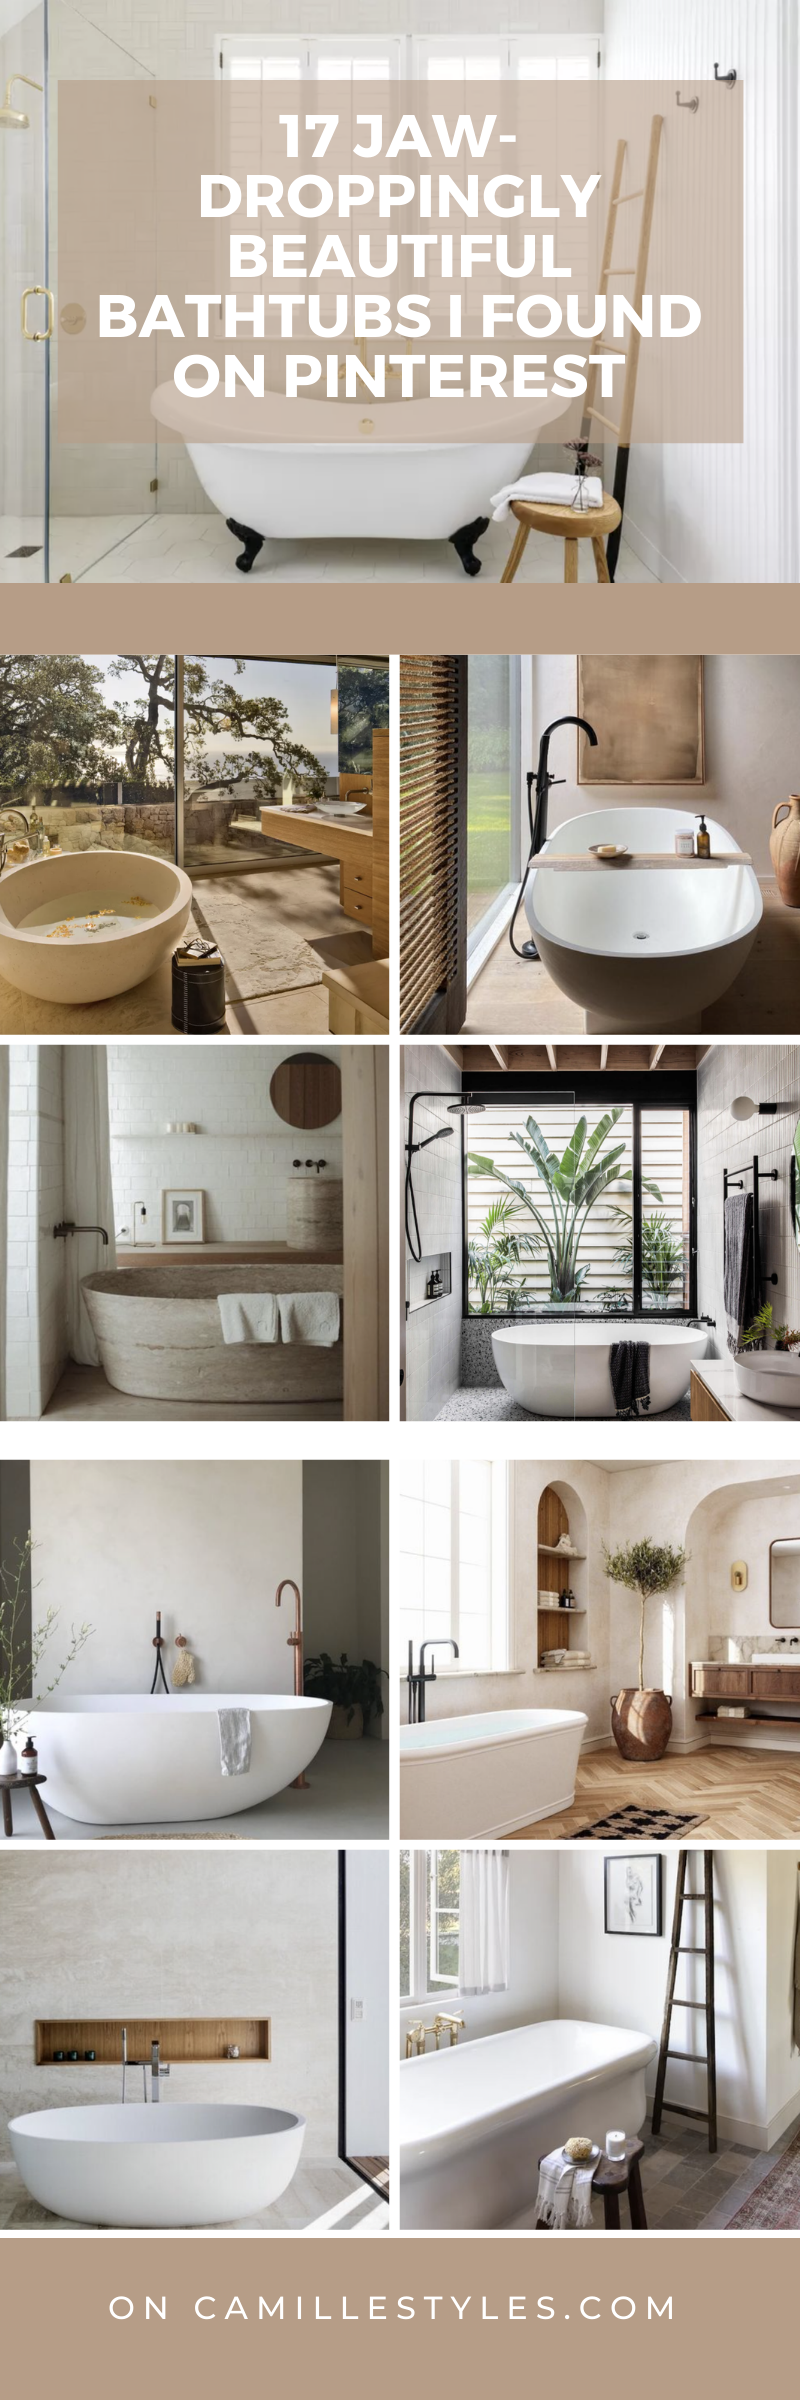 The 17 Most Beautiful Bathtubs on Pinterest Channel Spa Vibes at Home